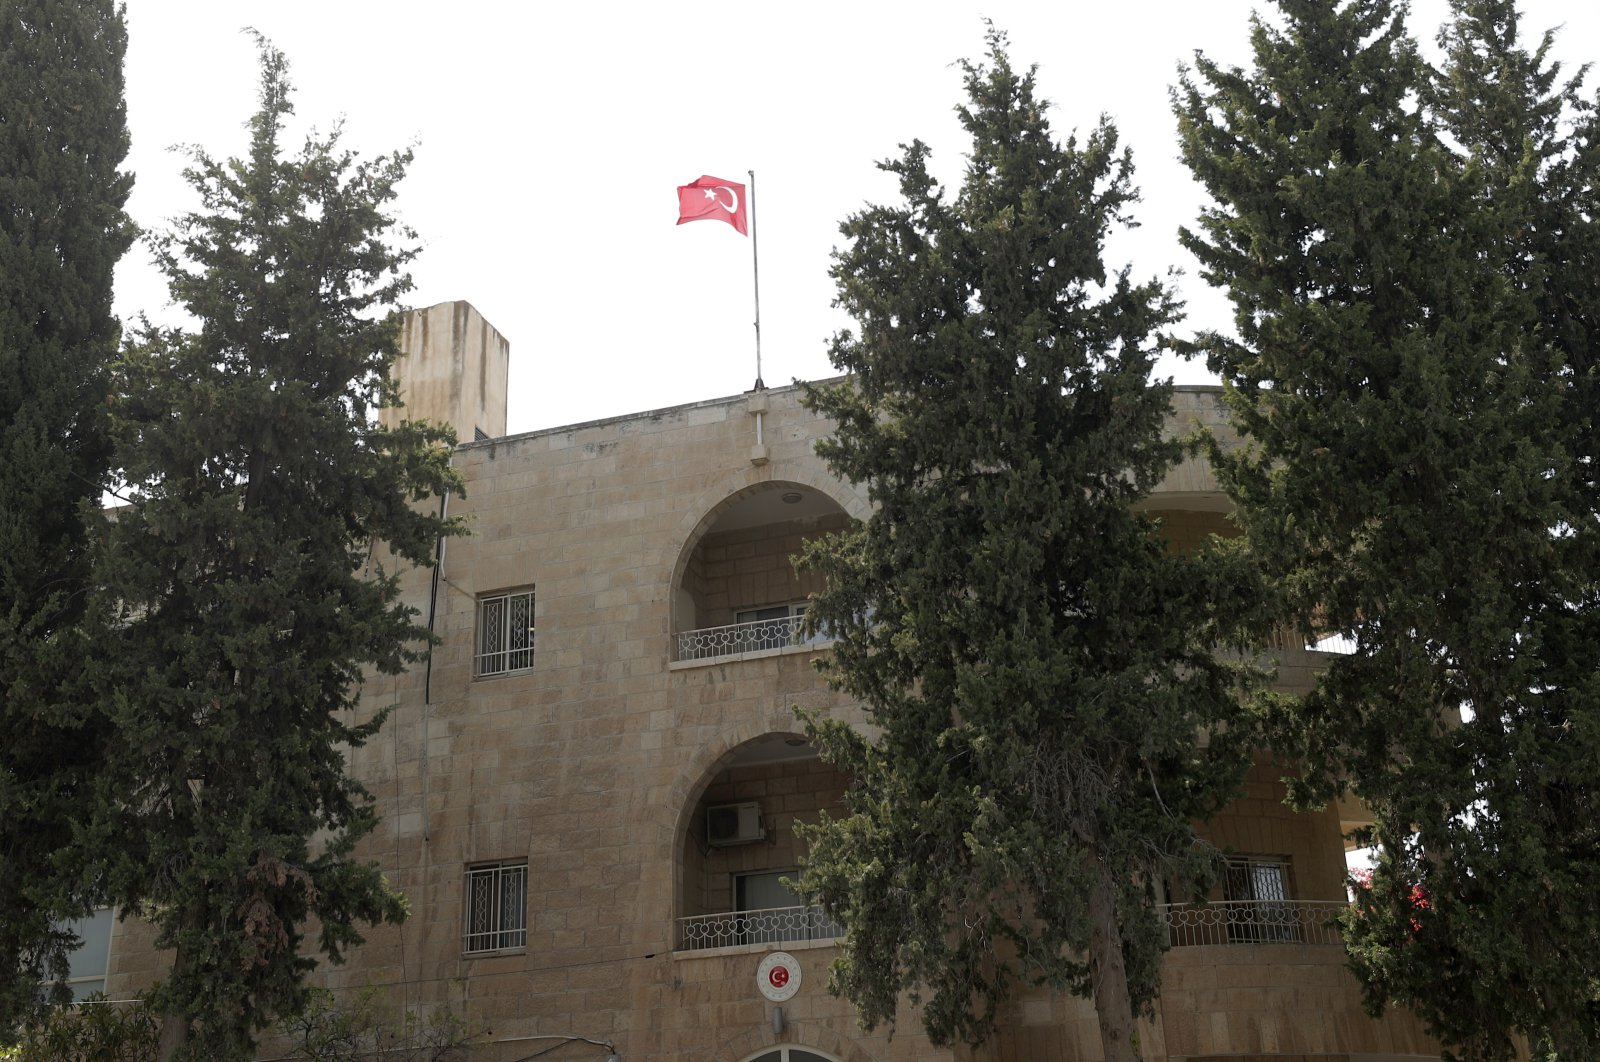 The Turkish Consulate building in Jerusalem, Israel, Aug. 17, 2022. (EPA Photo)